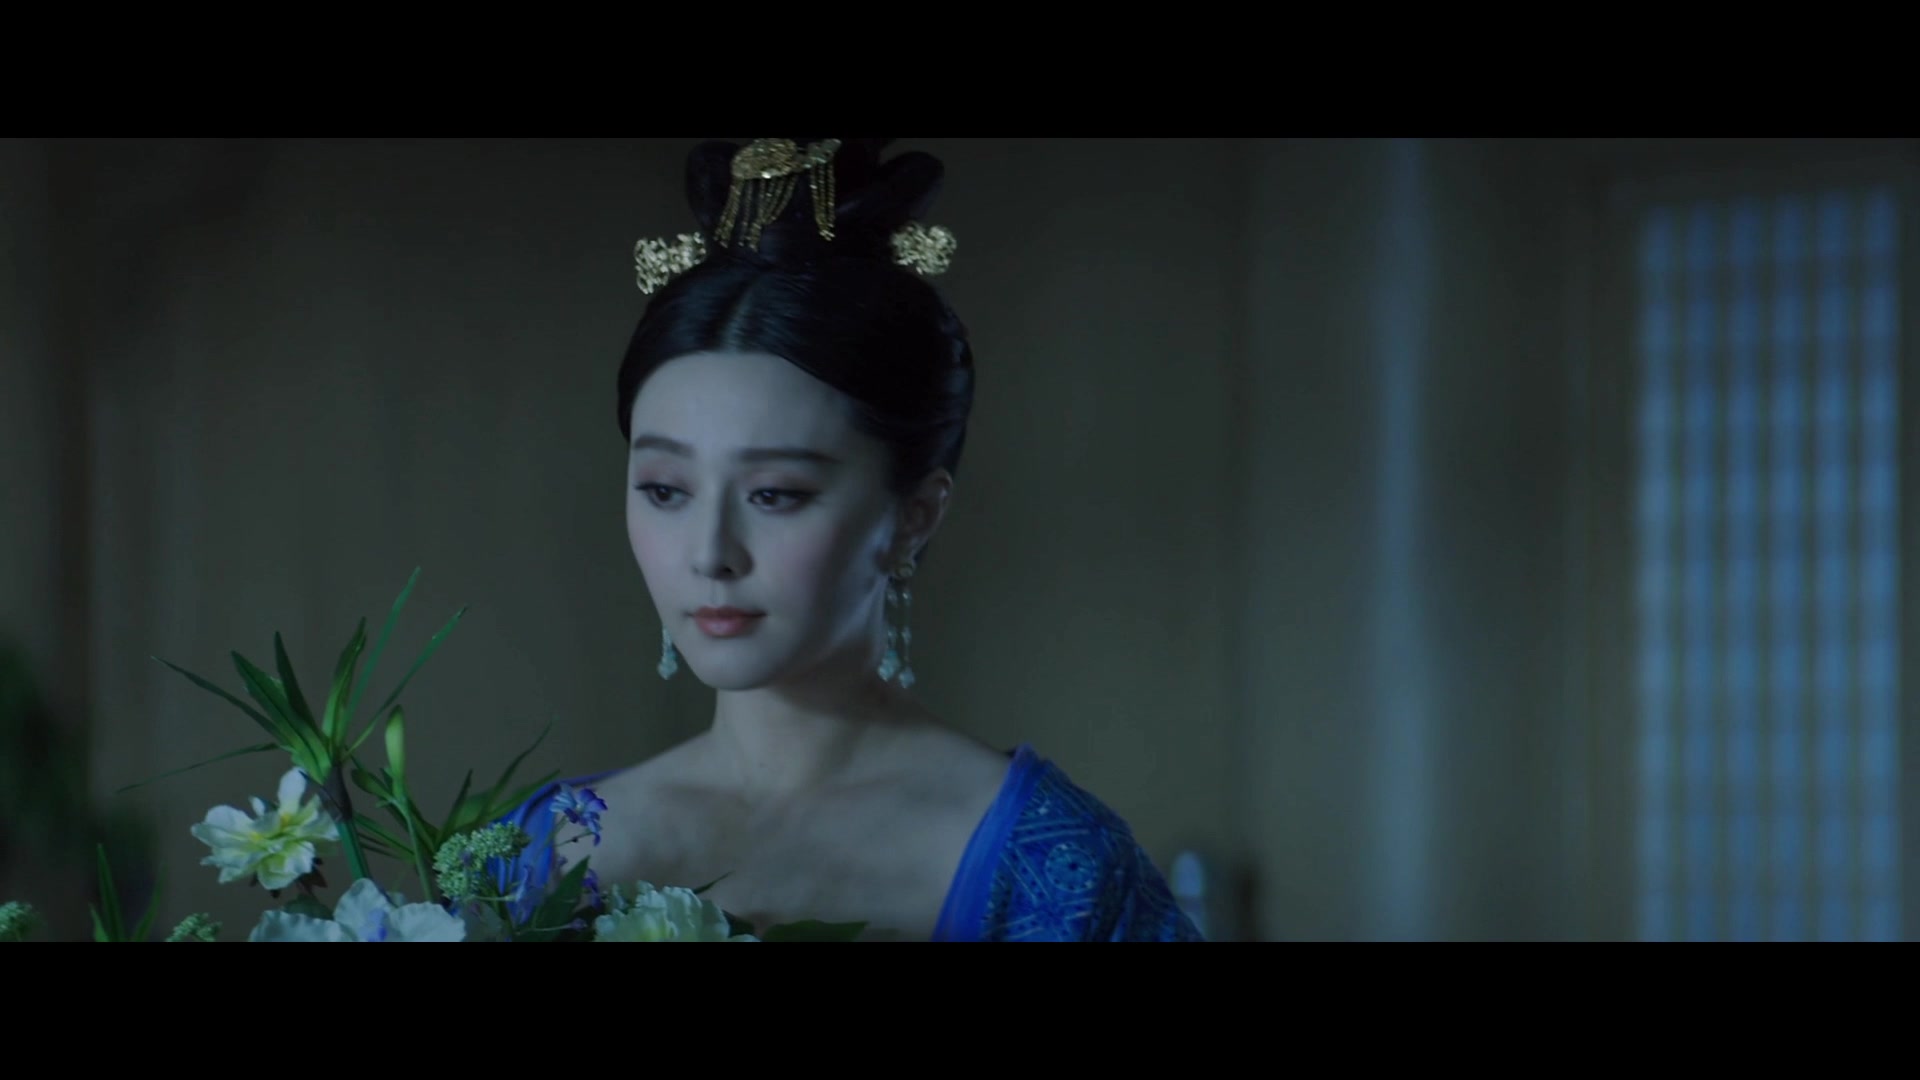 Lady of the Dynasty (2015)